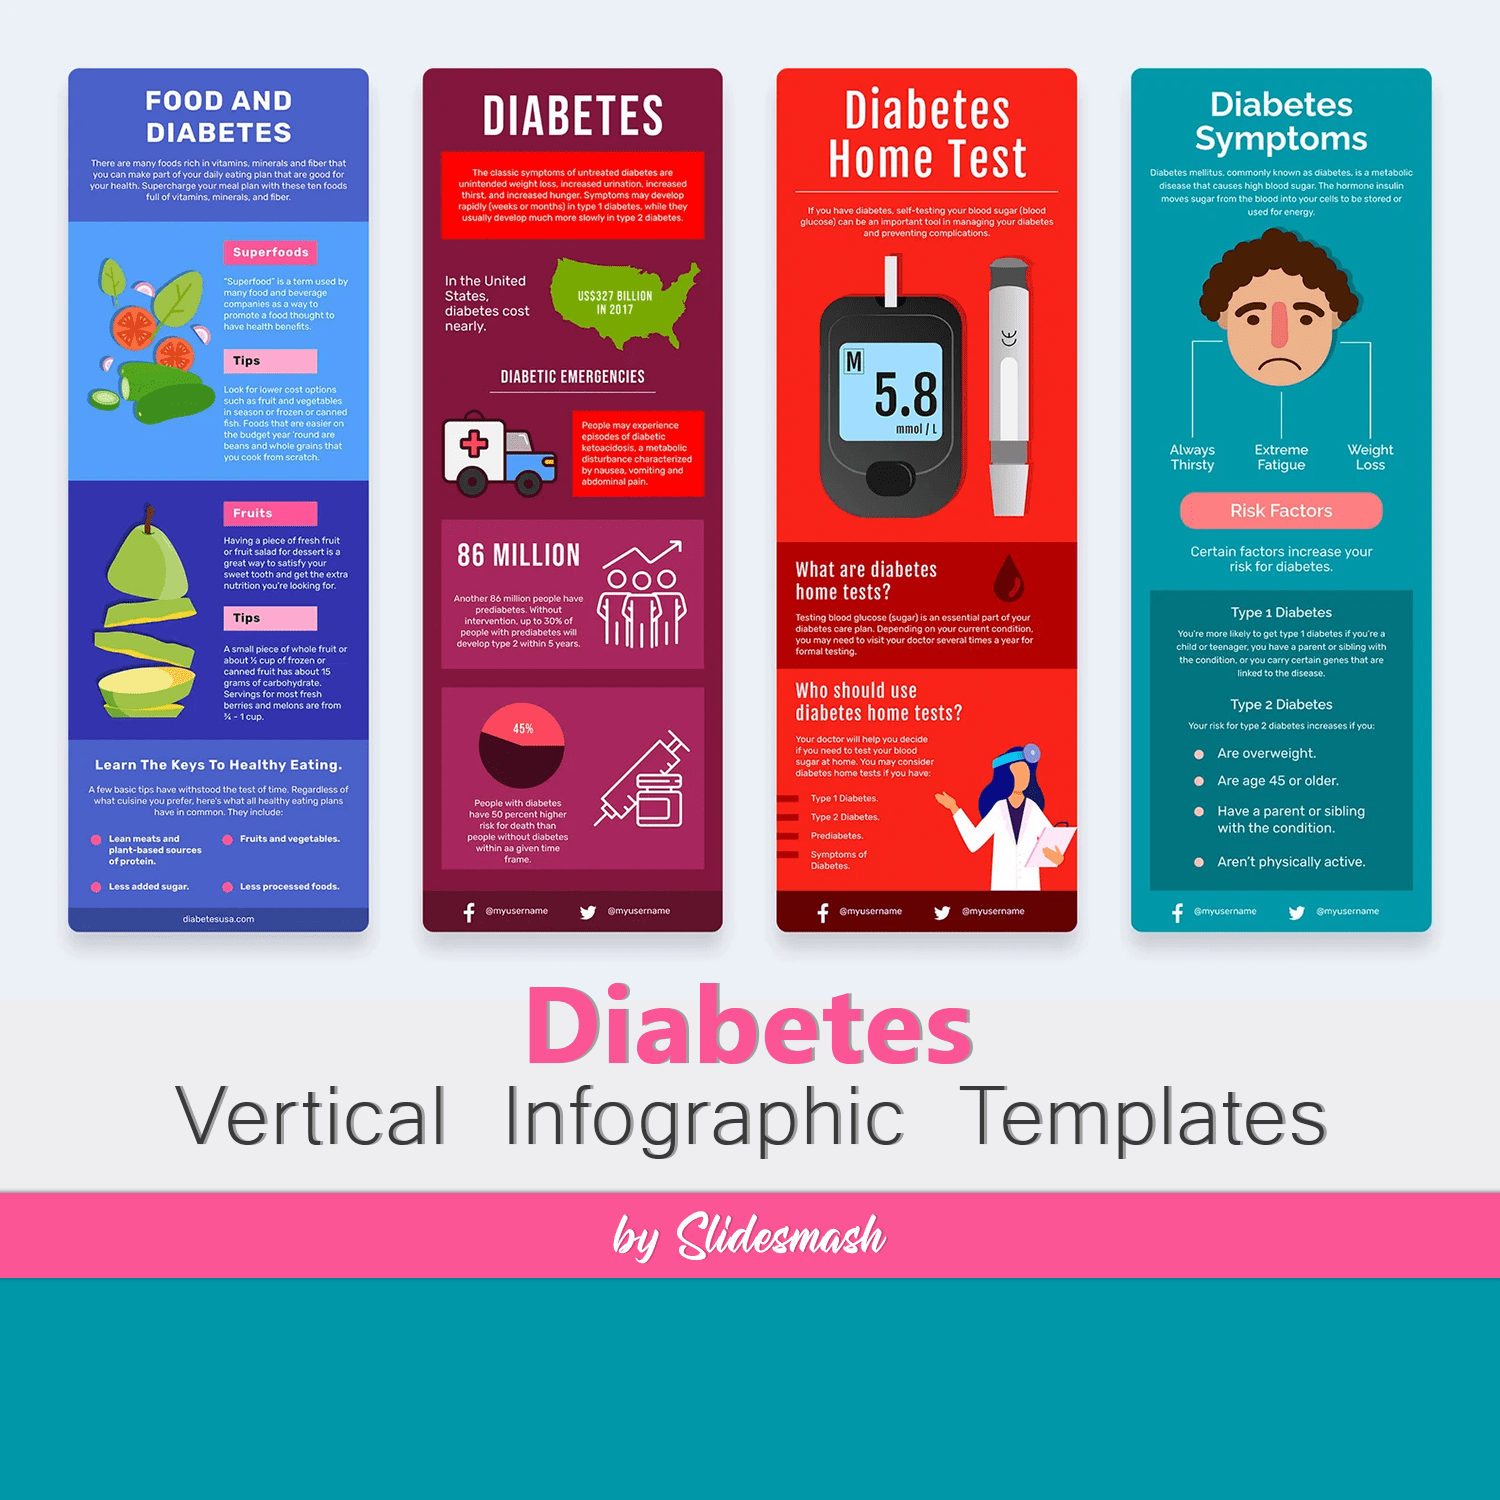 Diabetes Vertical Infographic Templates | Diagrams For PowerPoint, Illustrator, Keynote, Google Slides Cover.